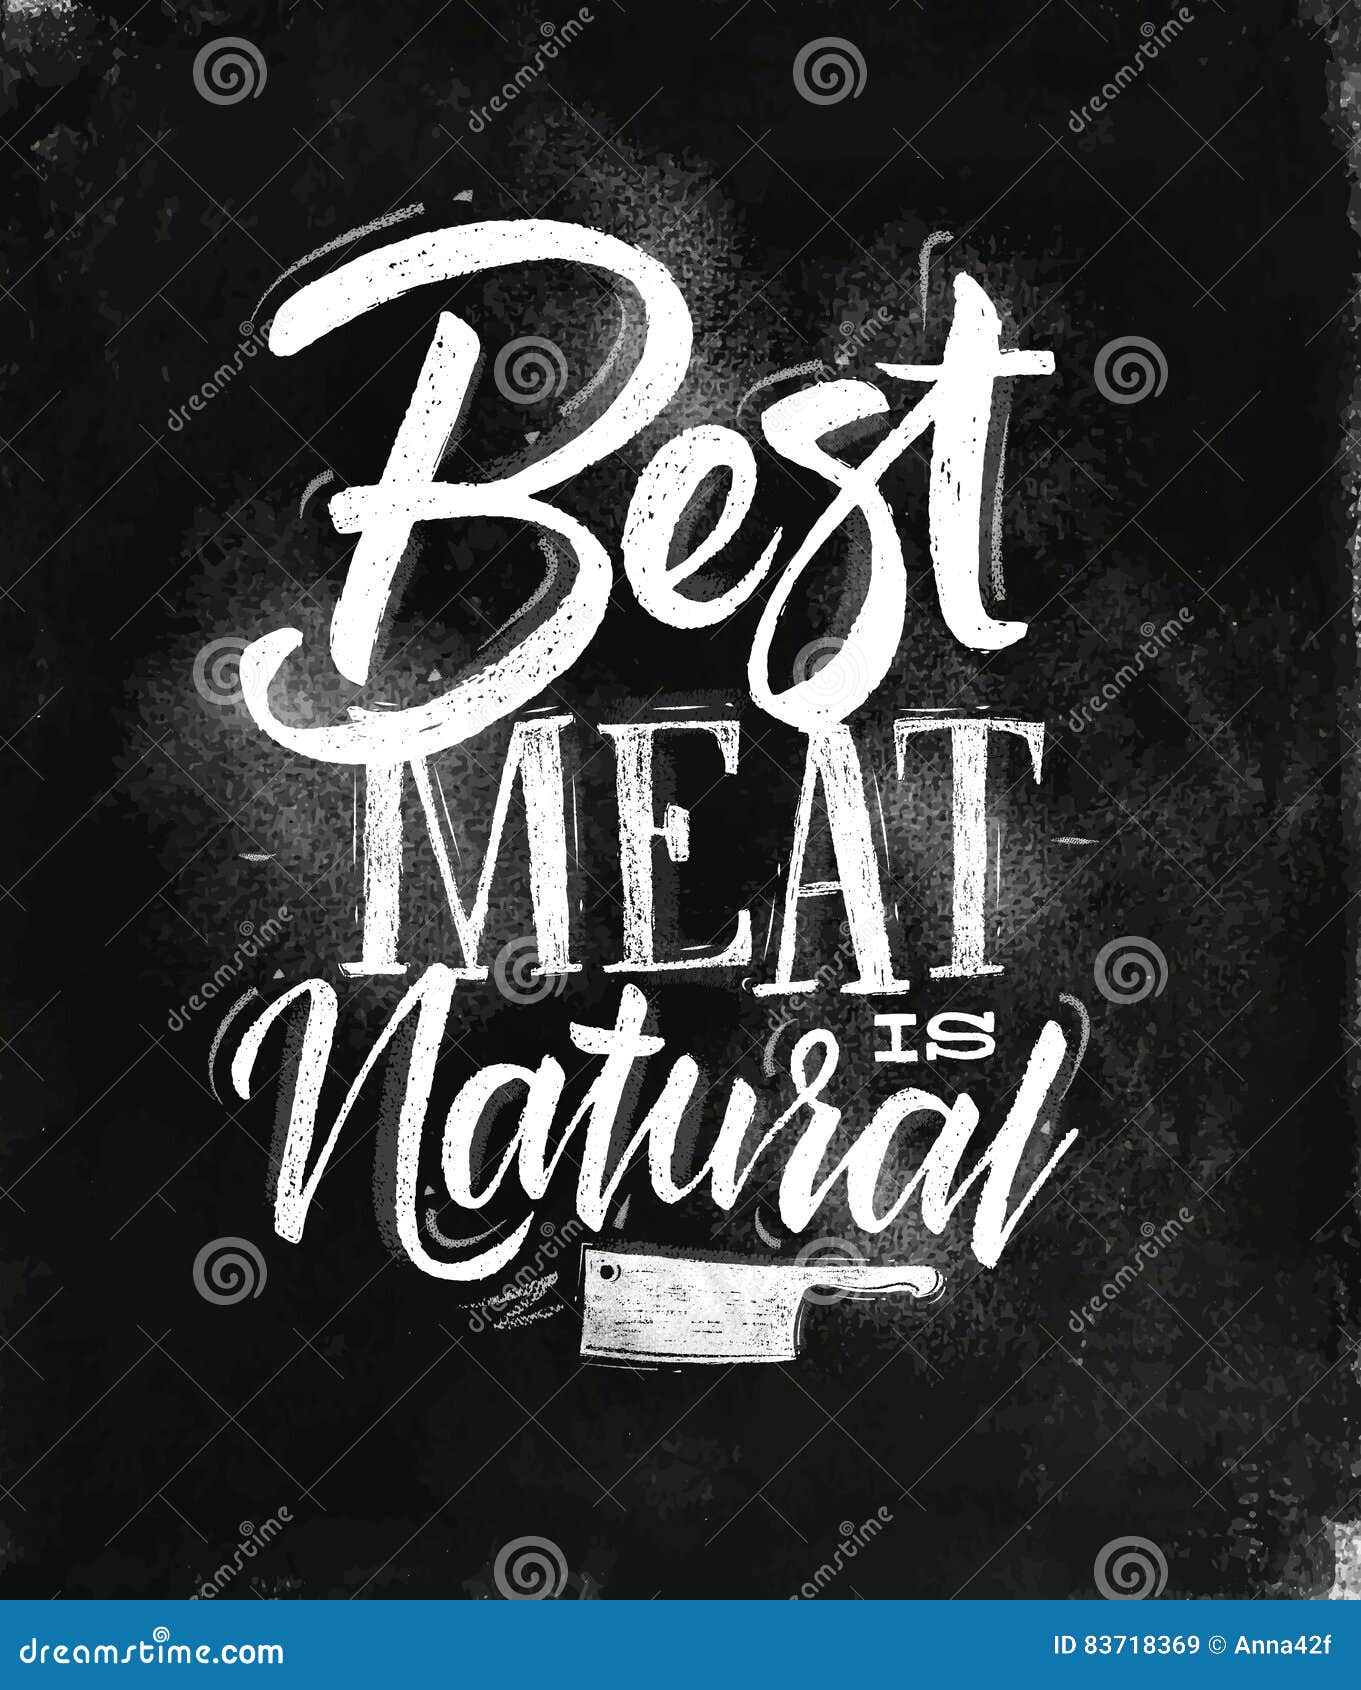 poster best meat chalk lettering natural drawing vintage style drawing chalkboard background 83718369